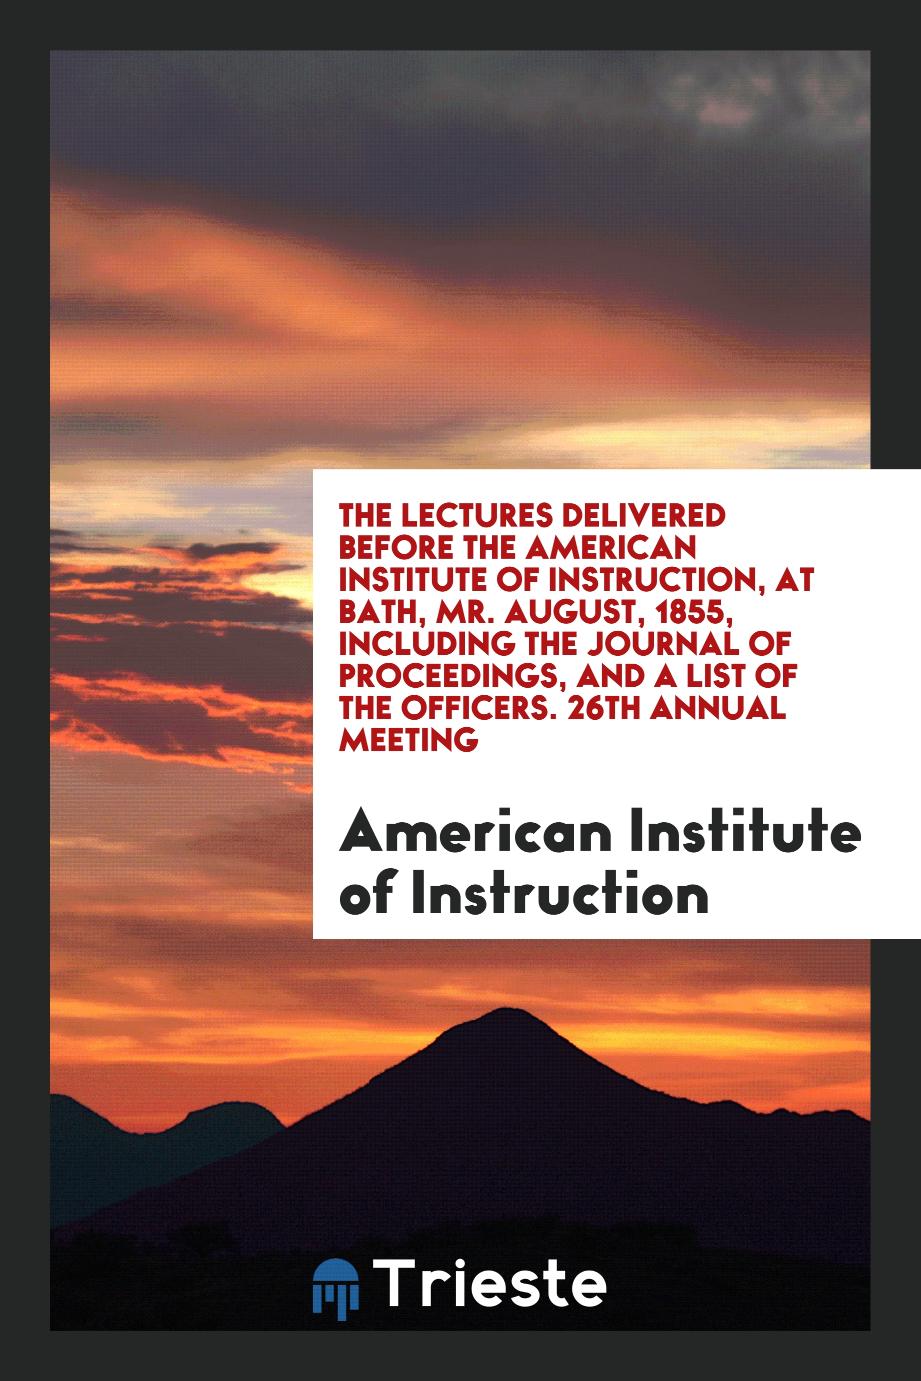 The Lectures Delivered before the American Institute of Instruction, at Bath, Mr. August, 1855, including the Journal of Proceedings, and a List of the Officers. 26th Annual Meeting